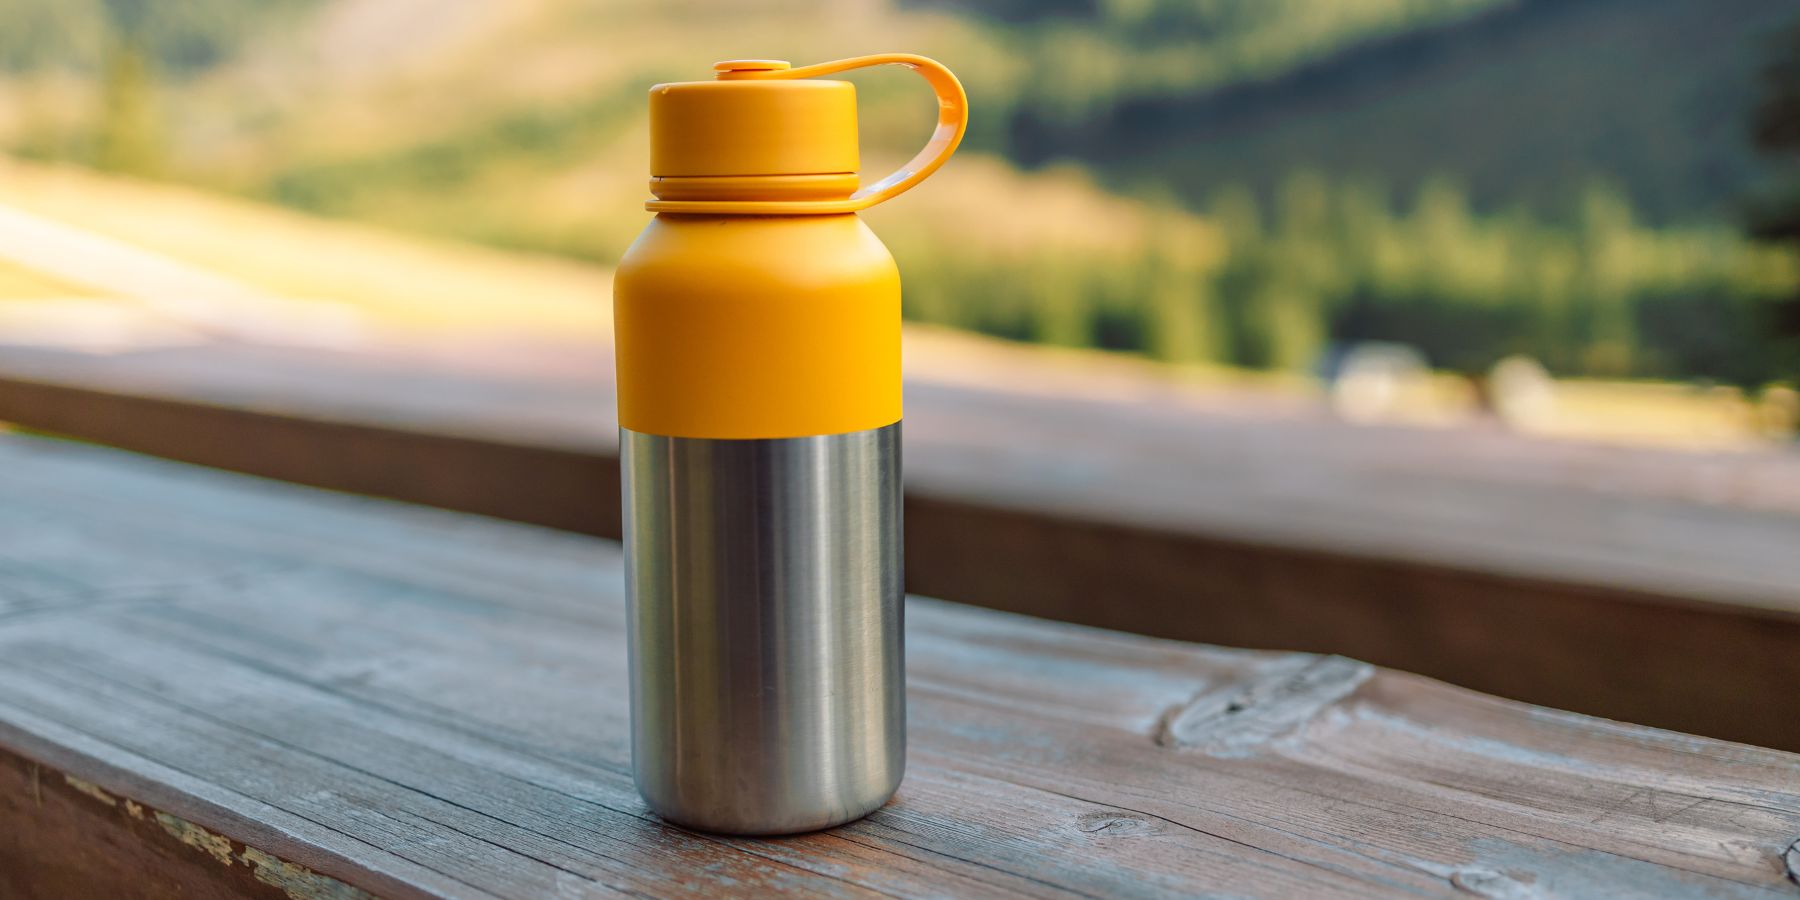 Why Choose Stainless Steel Water Bottles Over Plastic?